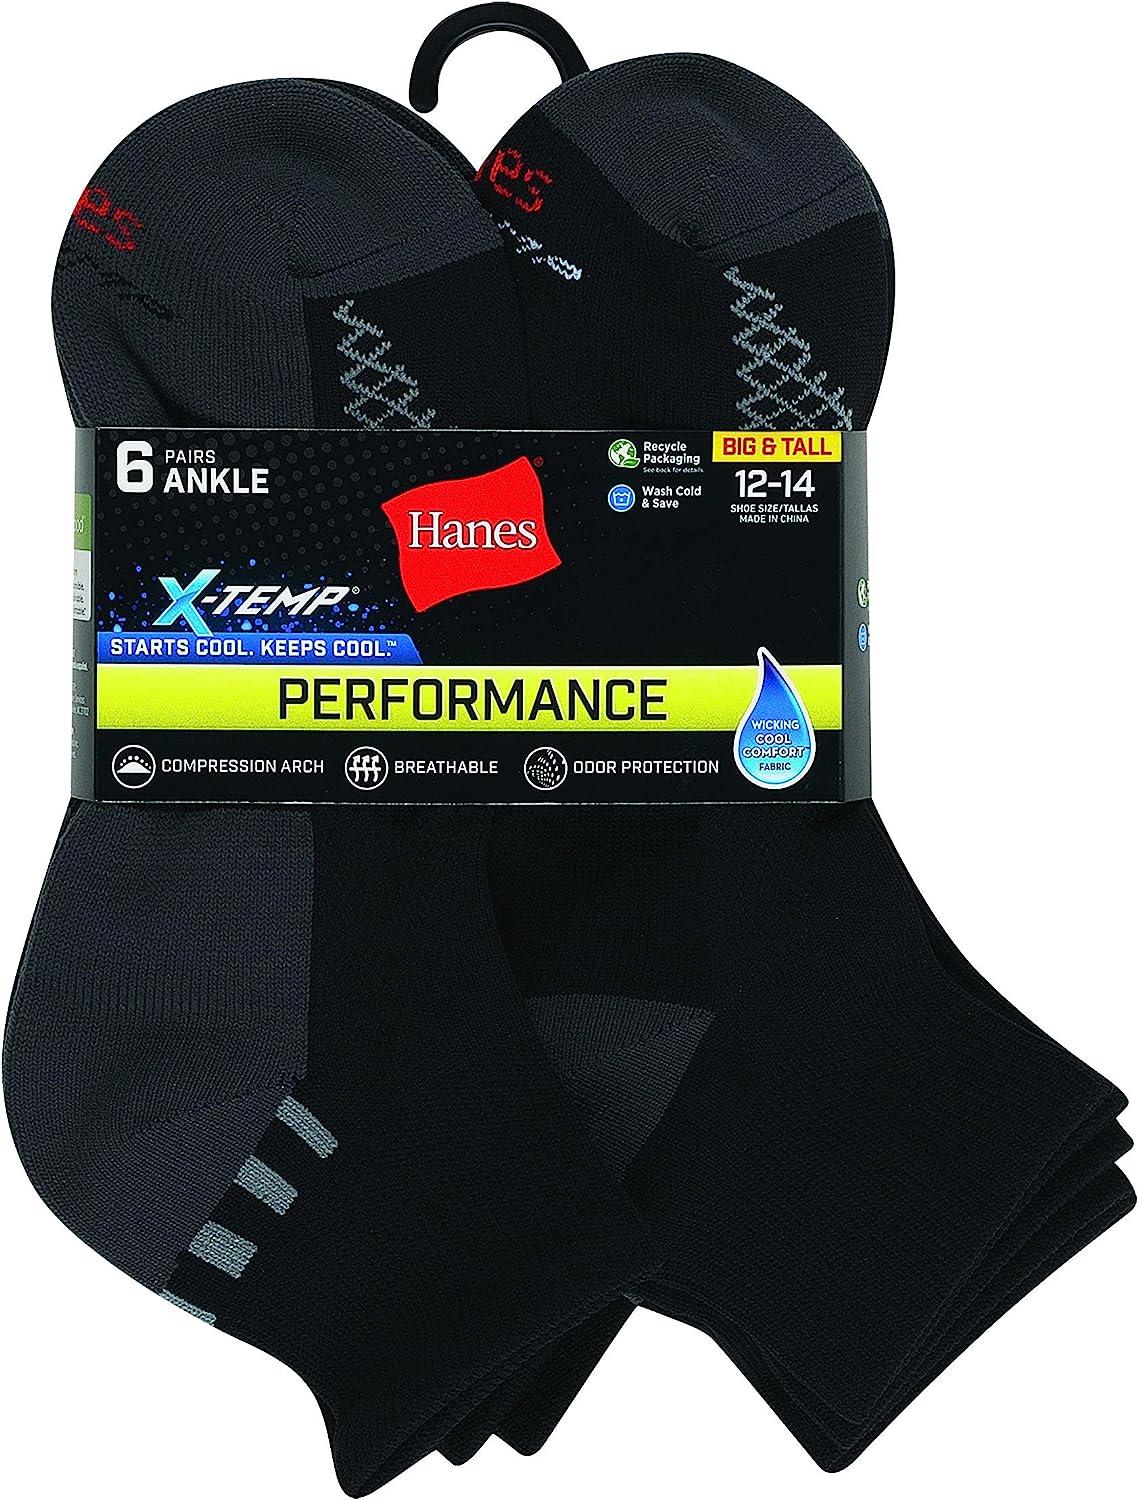 Hanes X-Temp Women's No-Show Socks, Extended Sizes, 6-Pairs